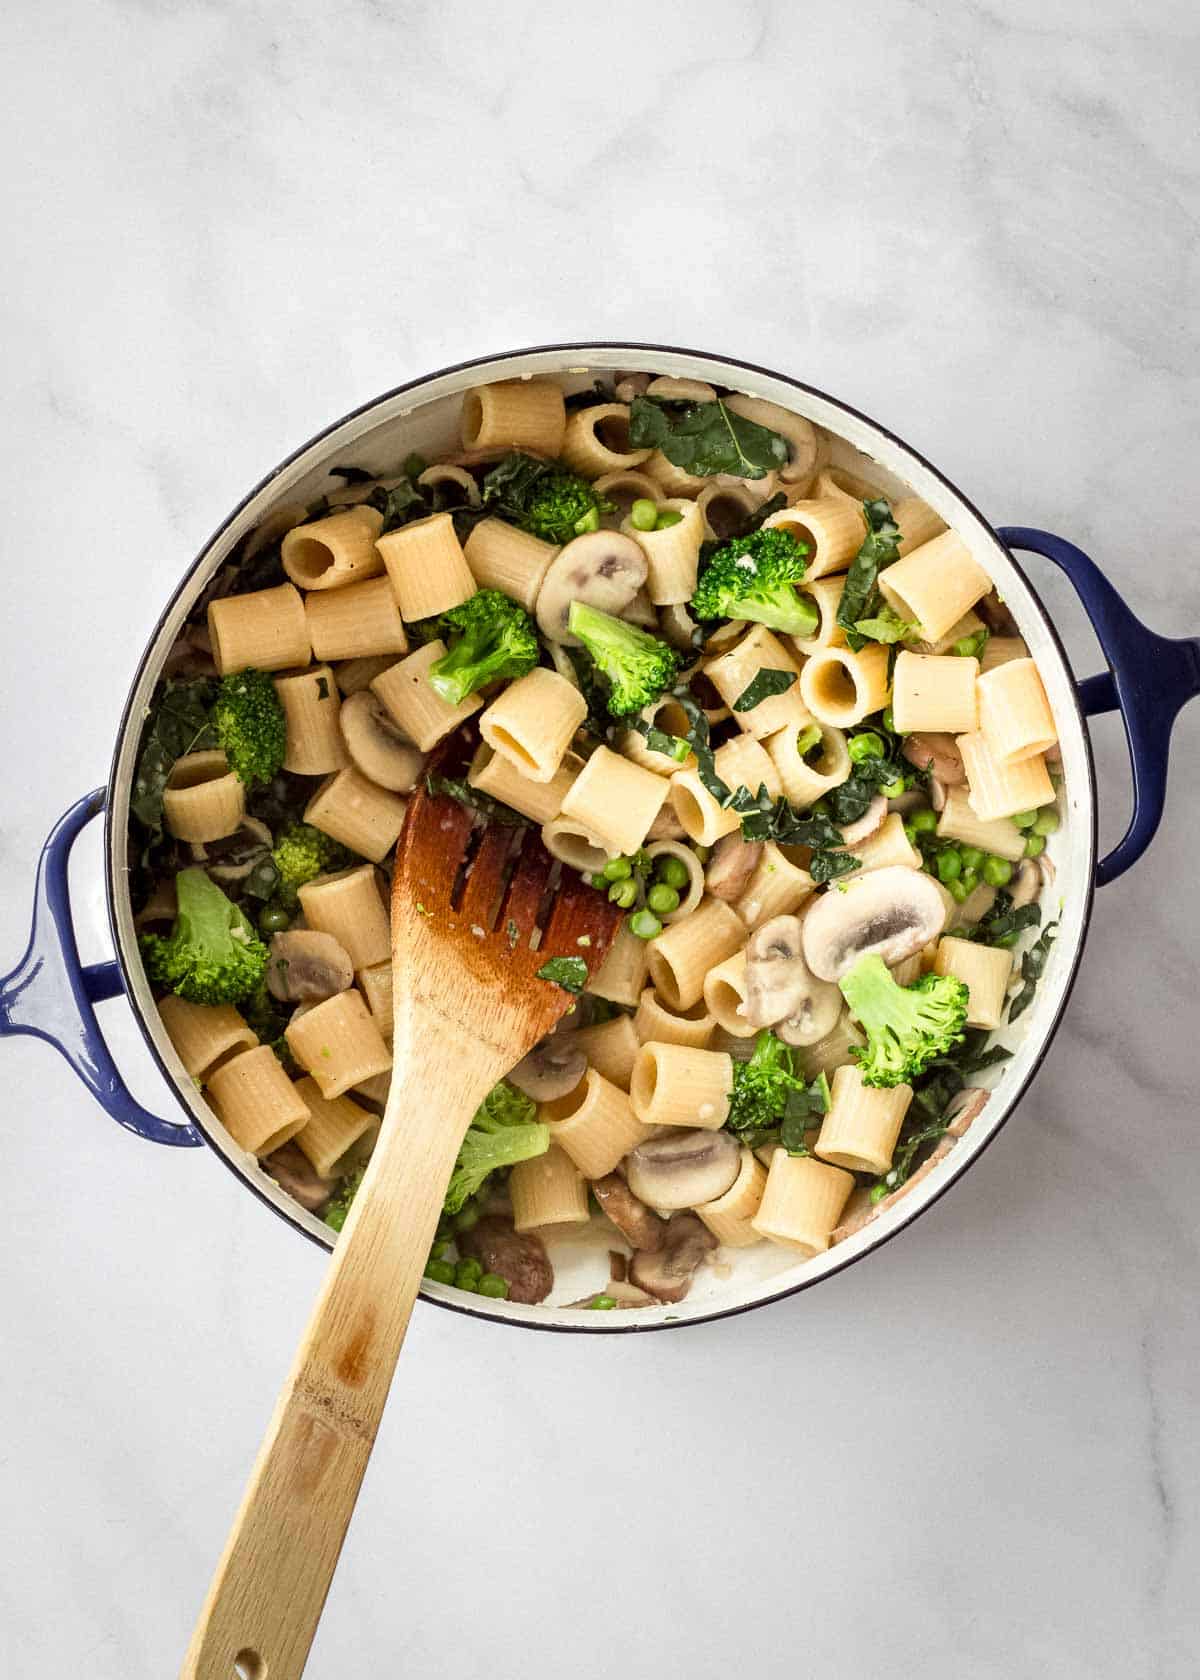 Large pot containing pasta with mushrooms and broccoli being cooked.